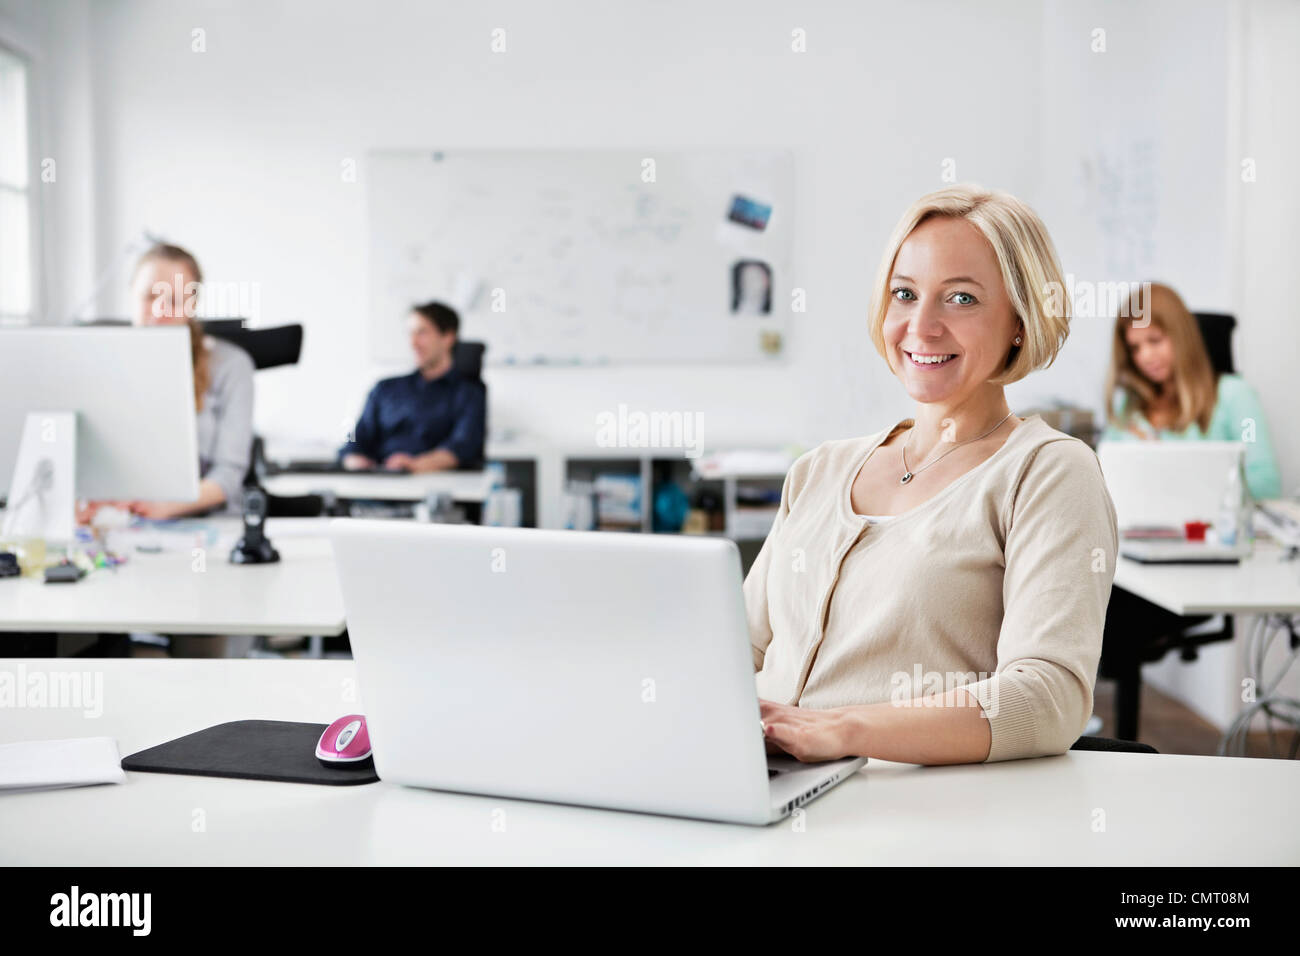 Woman sitting by computer with people in the background Stock Photo